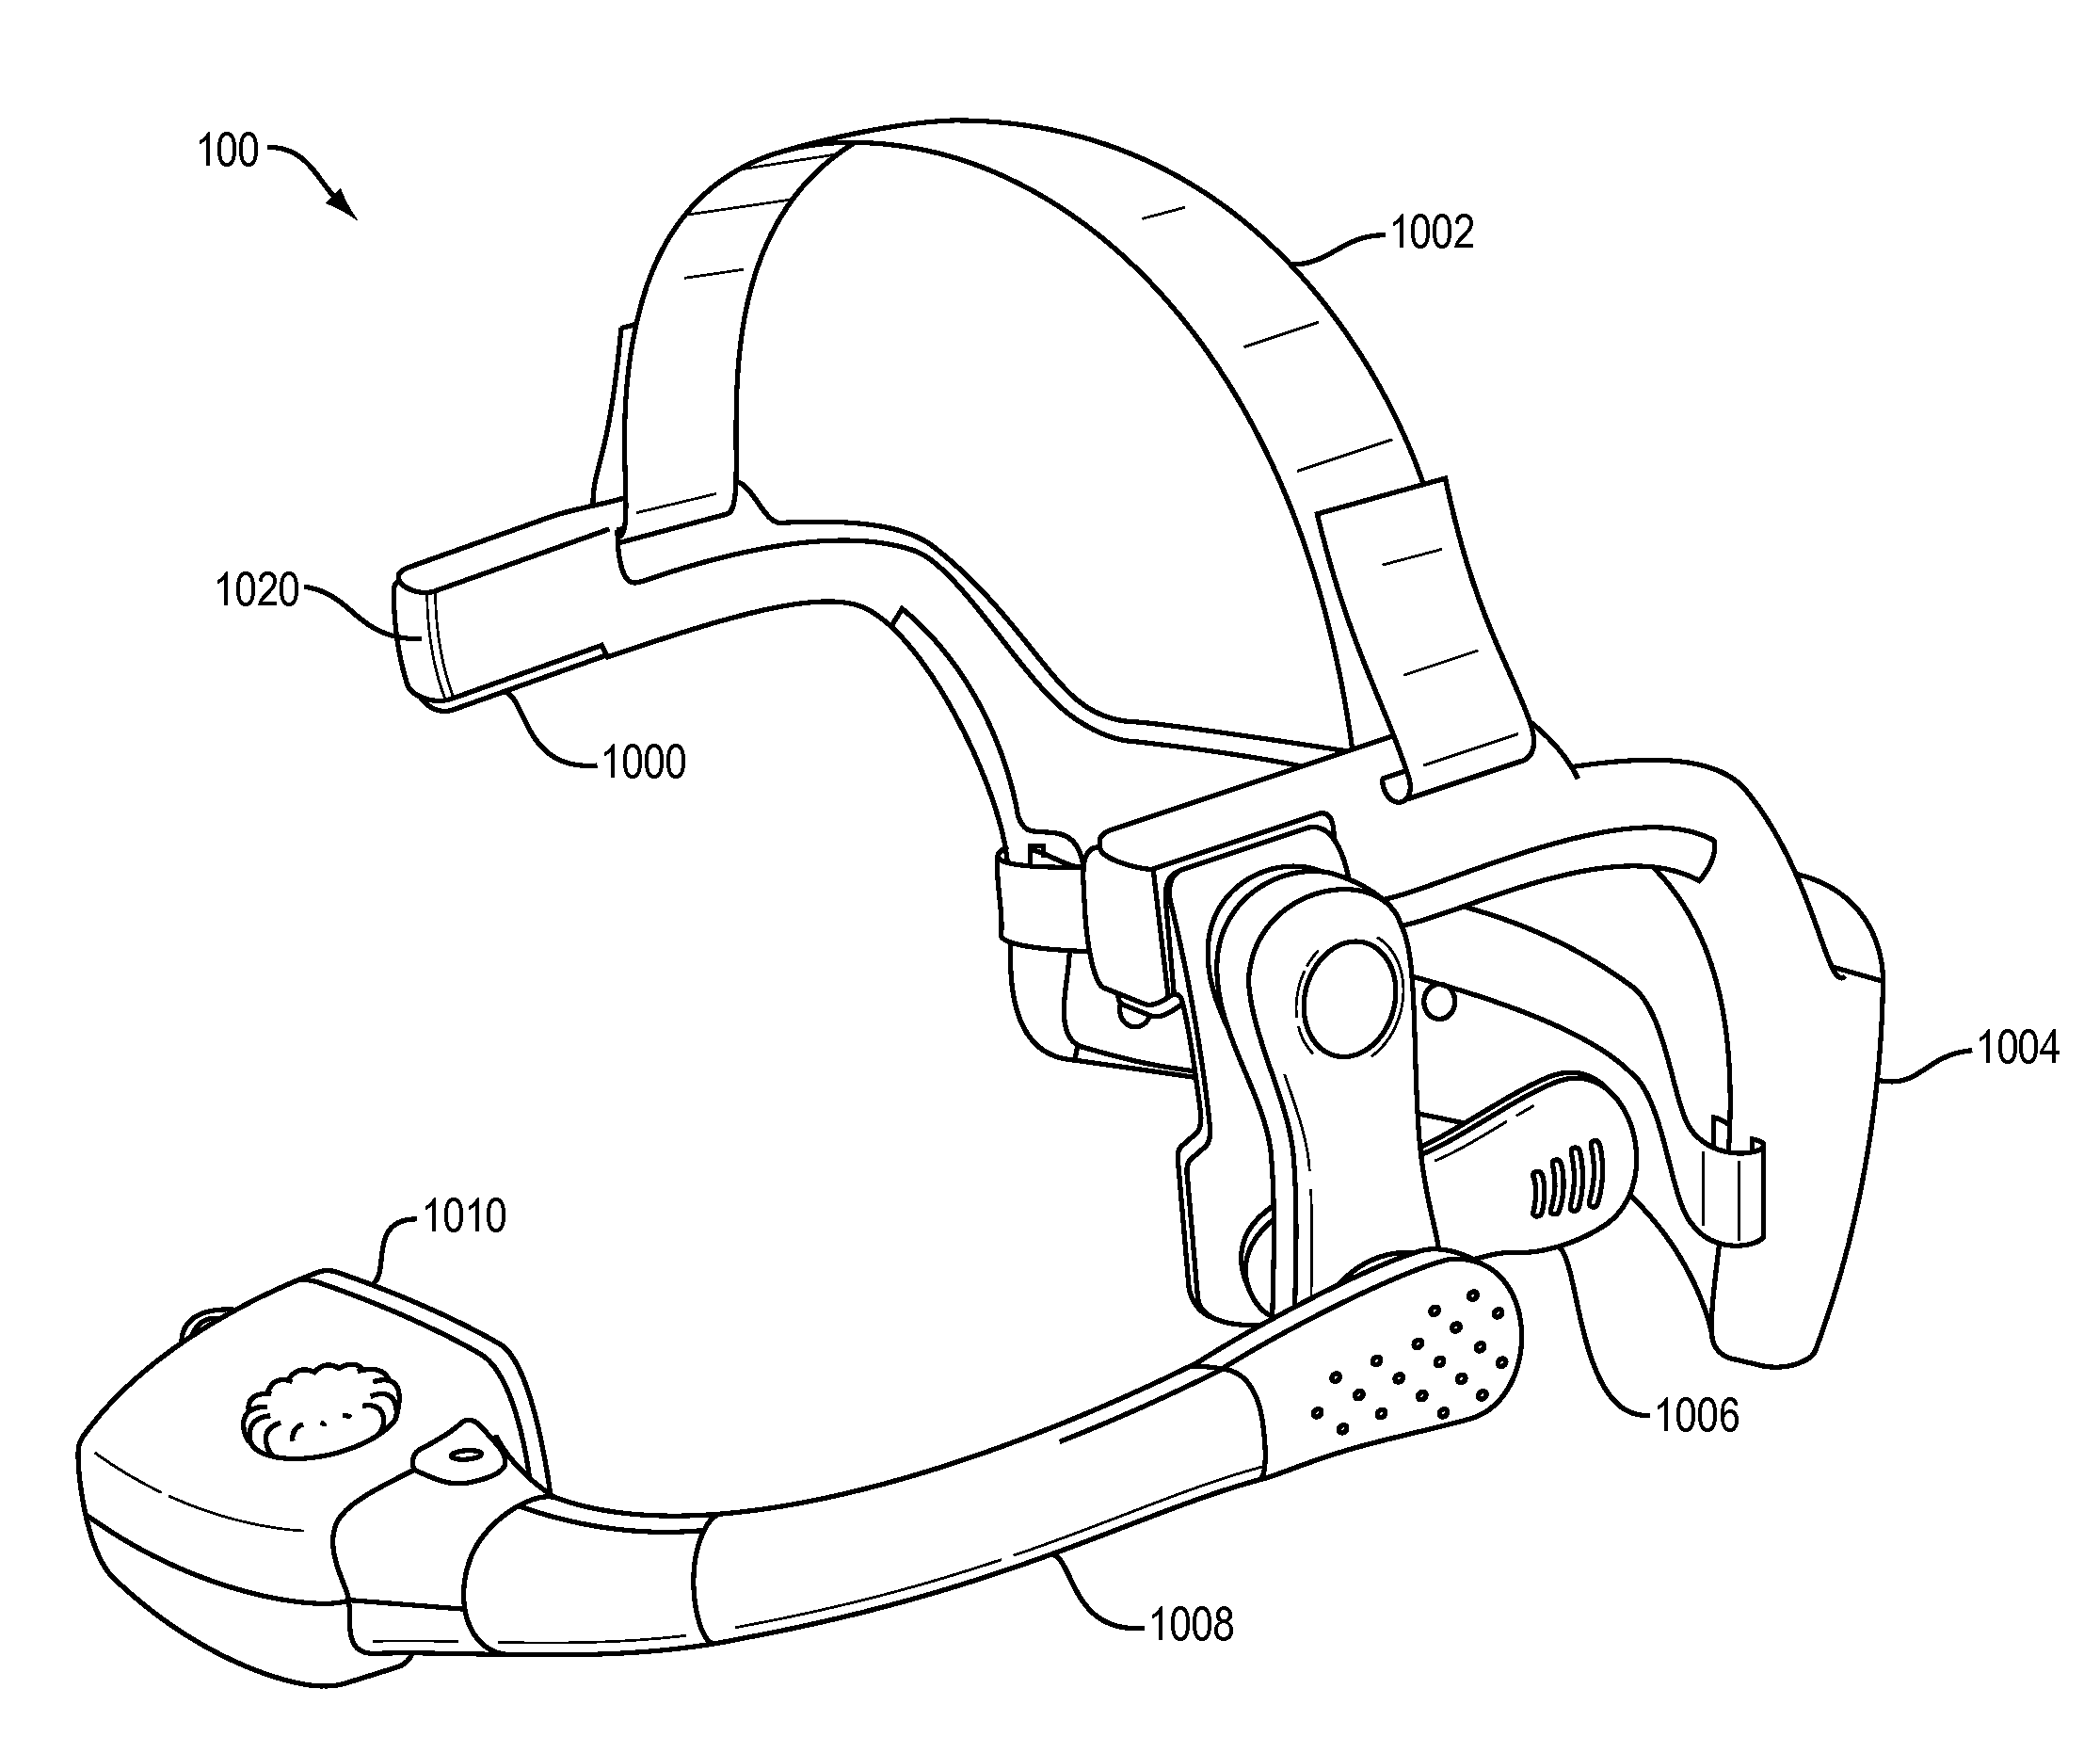 Wireless Hands-Free Computing Headset With Detachable Accessories Controllable by Motion, Body Gesture and/or Vocal Commands